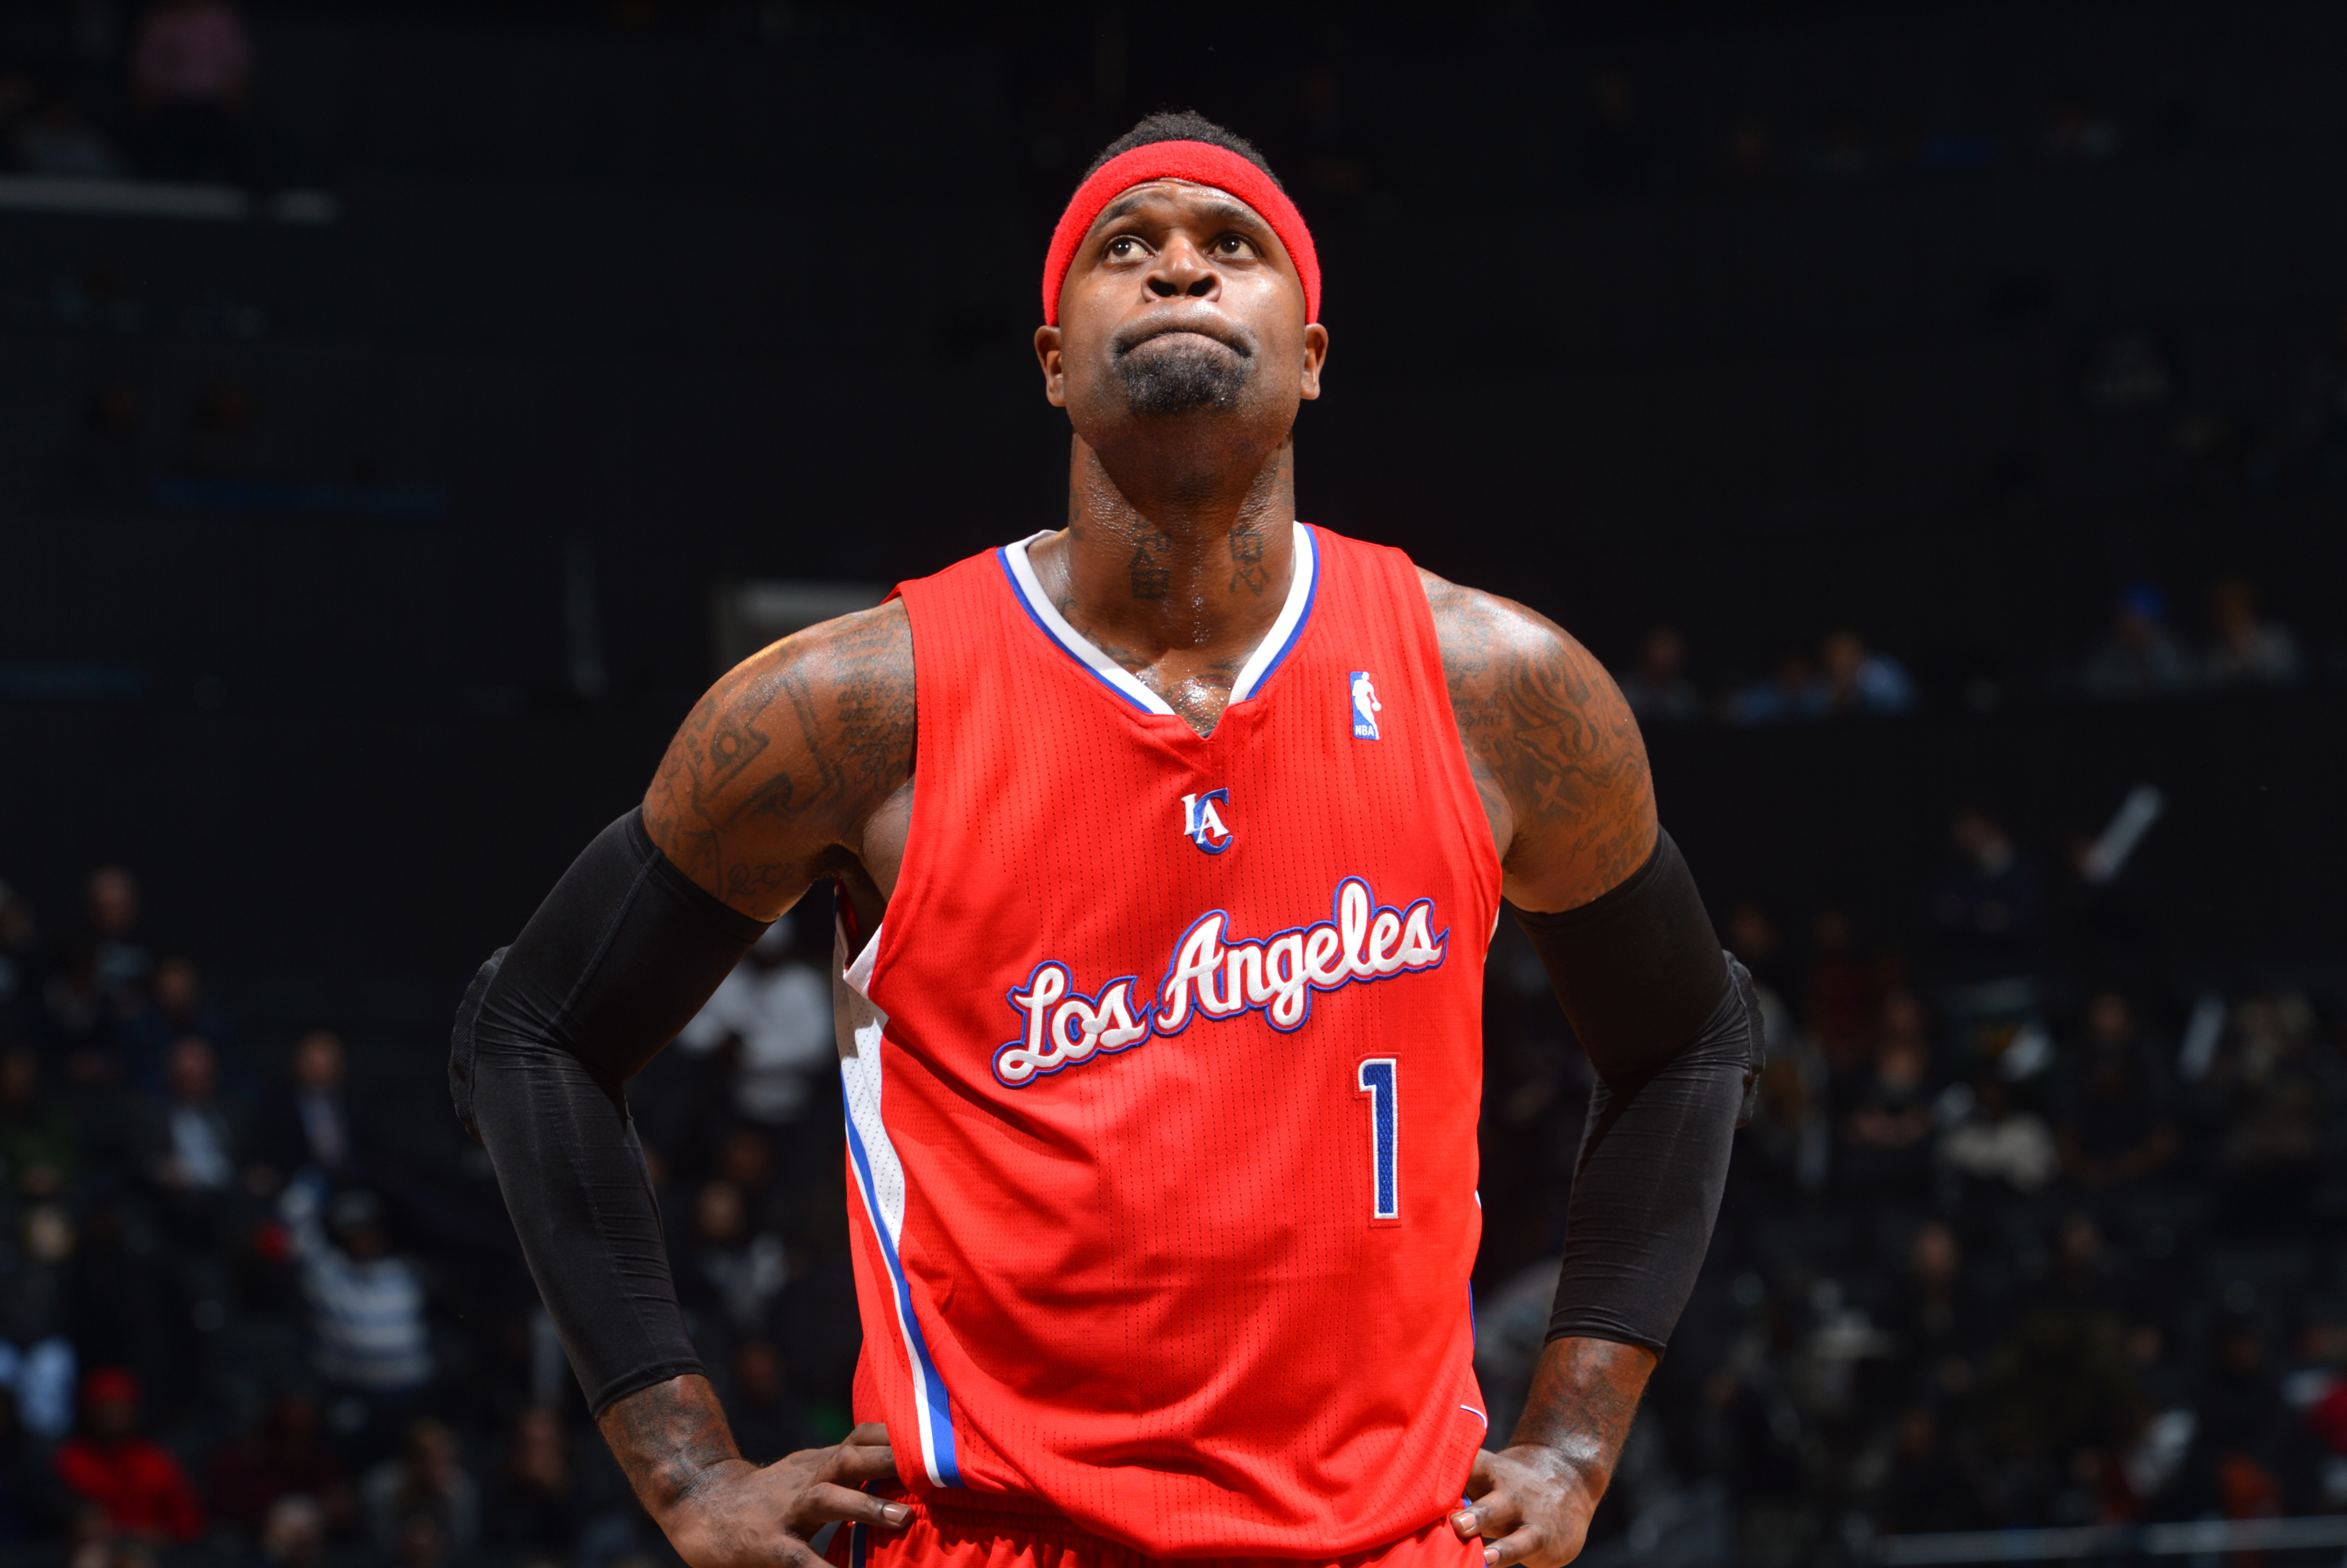 Stephen Jackson: “Butler and Rondo want me on the Bulls”